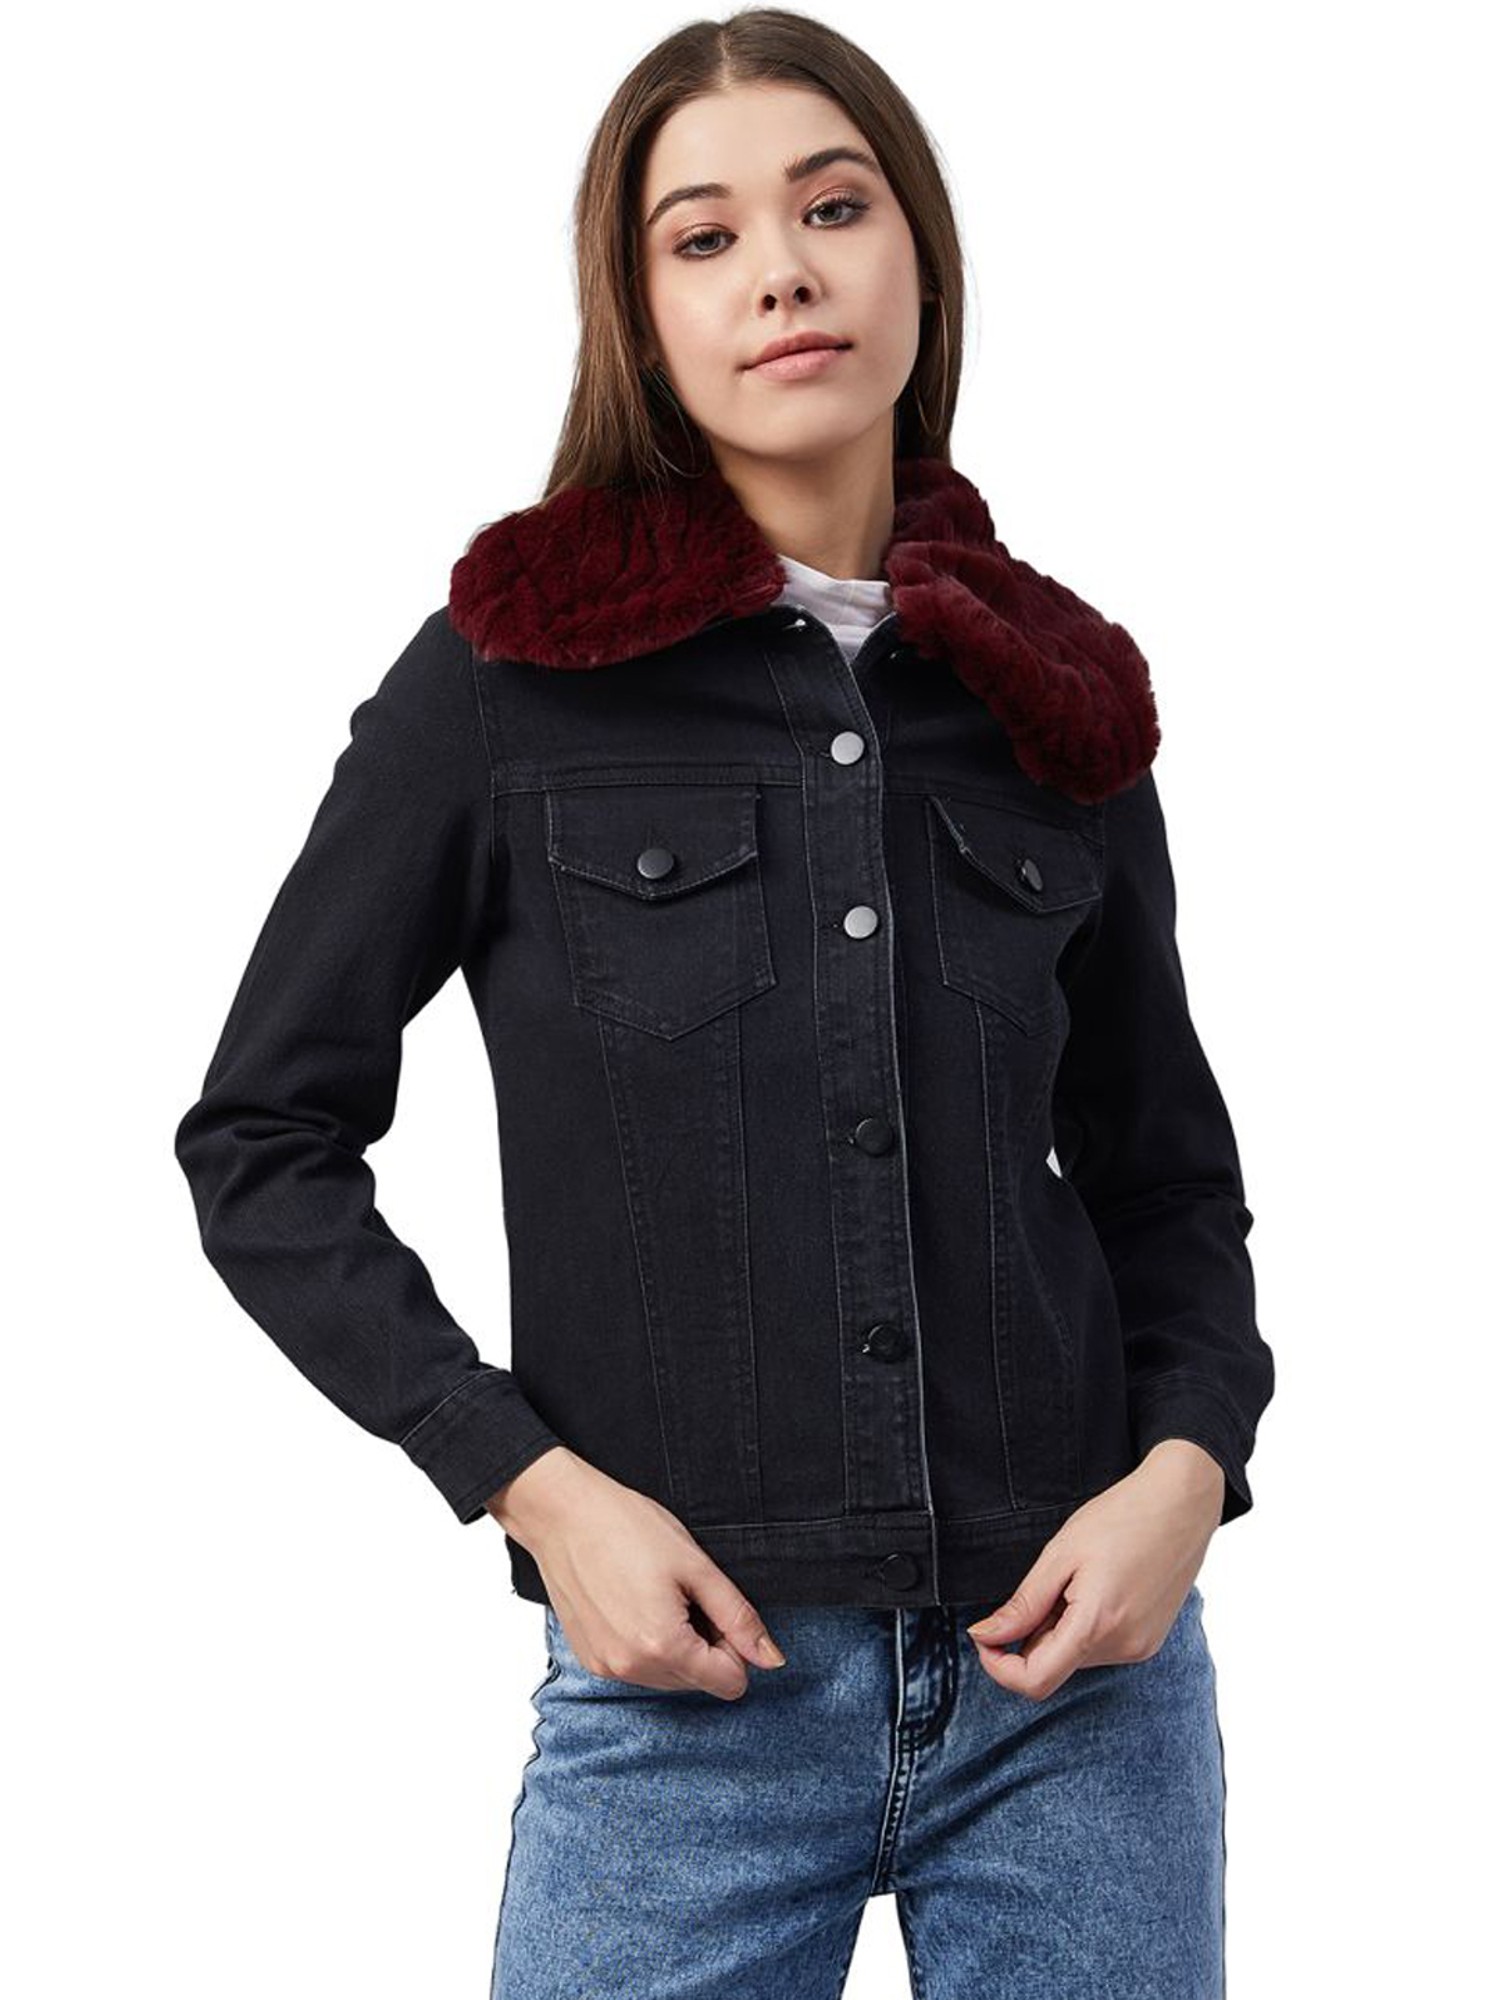 Buy HOW'ON Men's Warm Fur Collar Sherpa Lined Denim Jacket Casual Outwear  Black S at Amazon.in